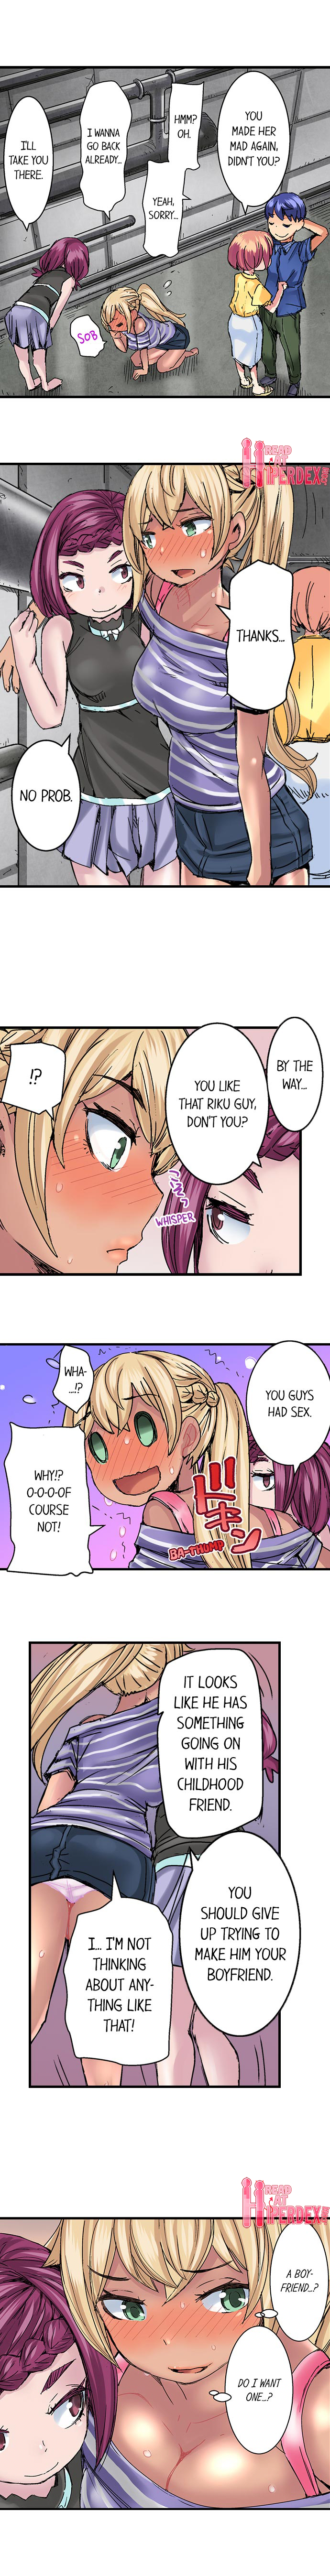 Taking a Hot Tanned Chick’s Virginity - Chapter 25 Page 8